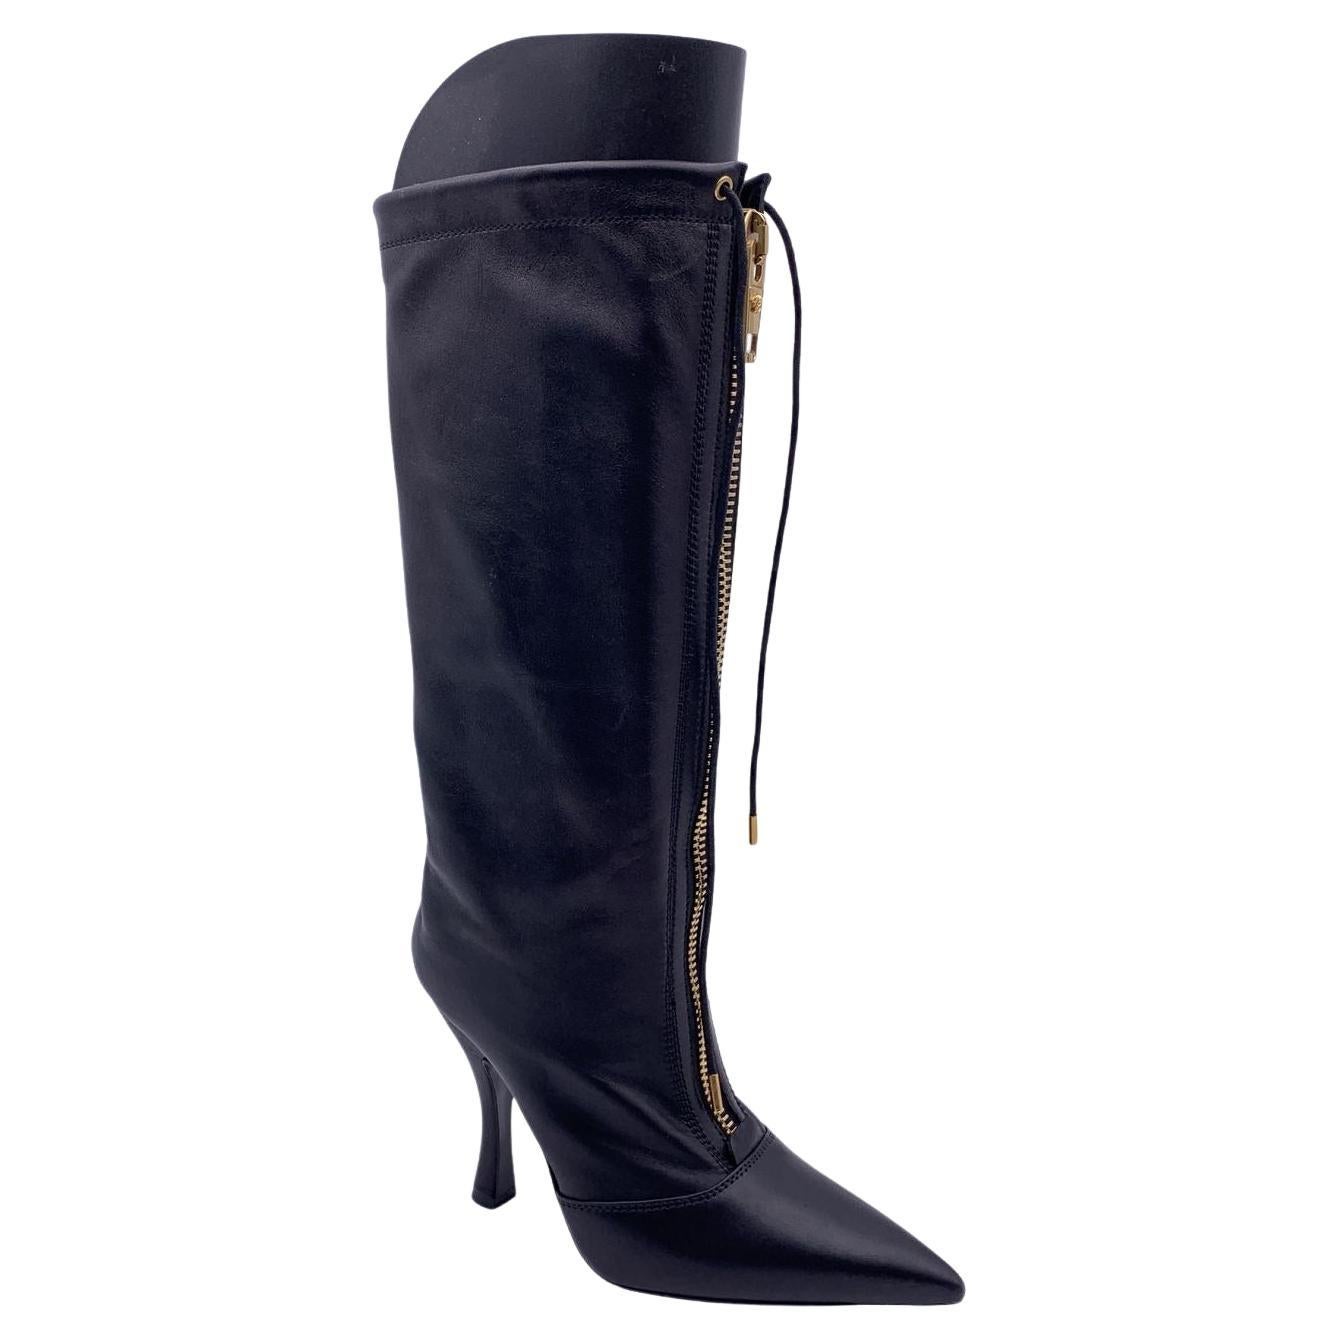 Versace Black Leather Heeled Boots with Central Zip Size 36